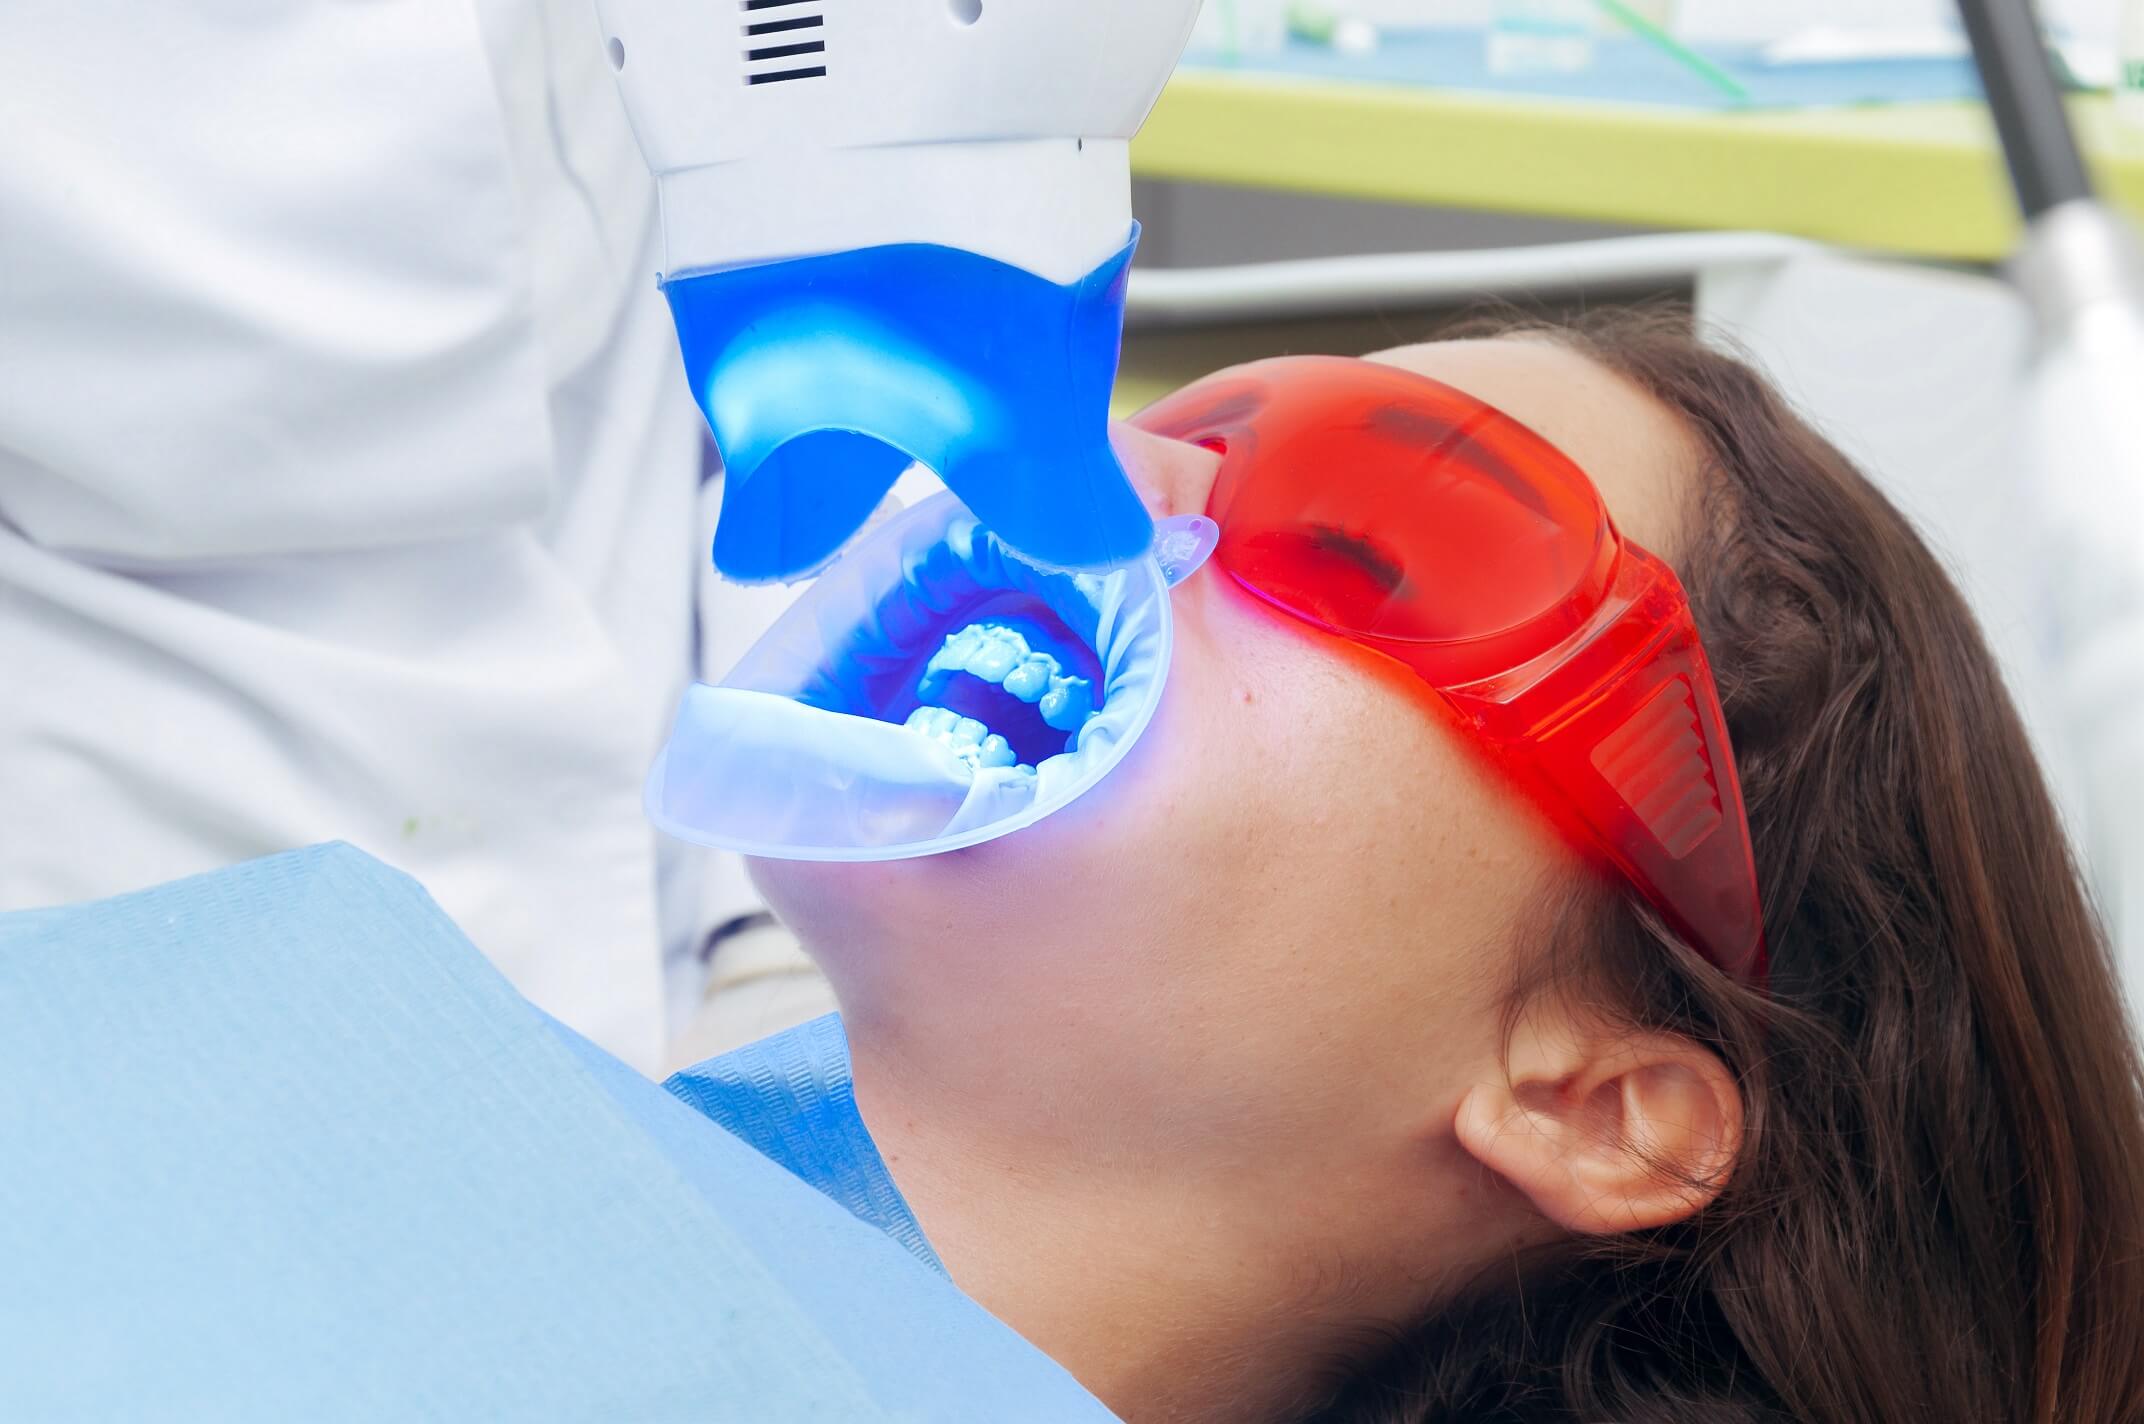 A machine shining a bright blue light on a girl's teeth while she sits in a dentist chair.